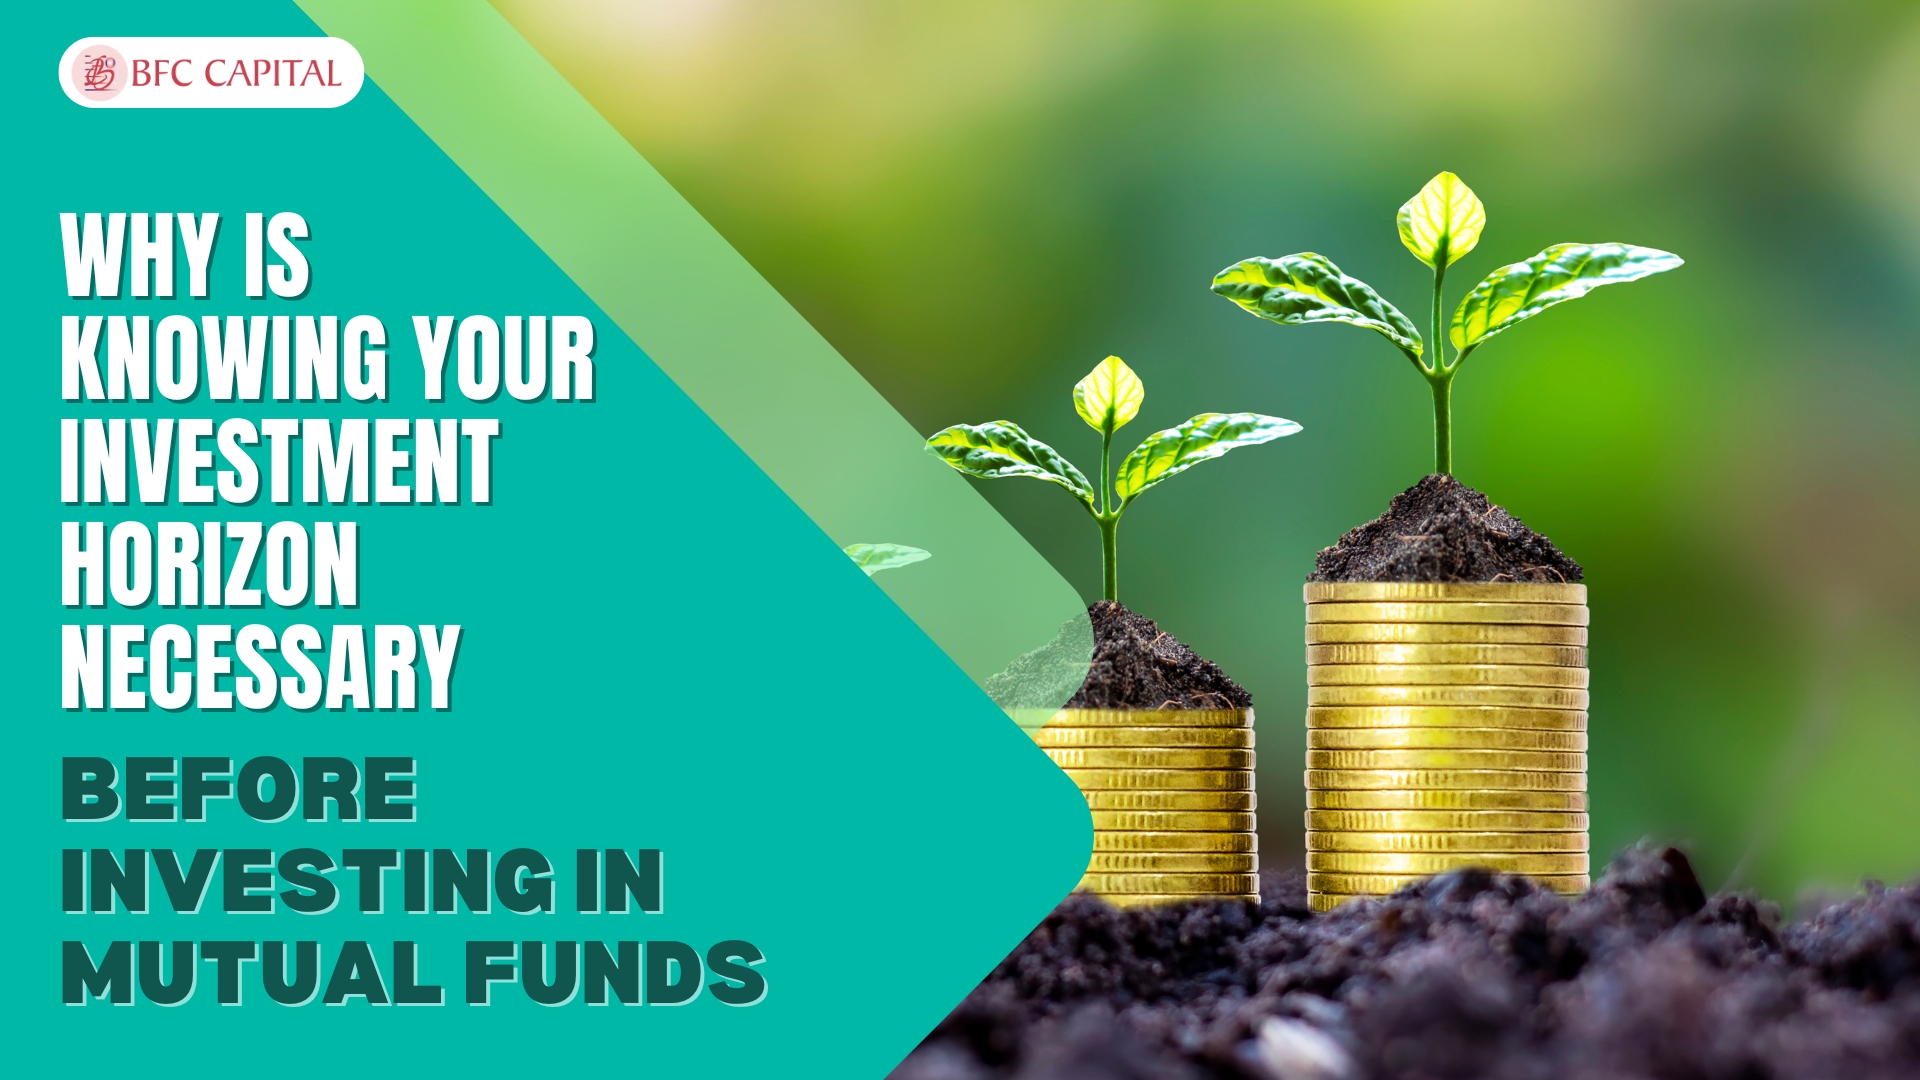 Why is Knowing Your Investment Horizon Necessary Before Investing in Mutual Funds